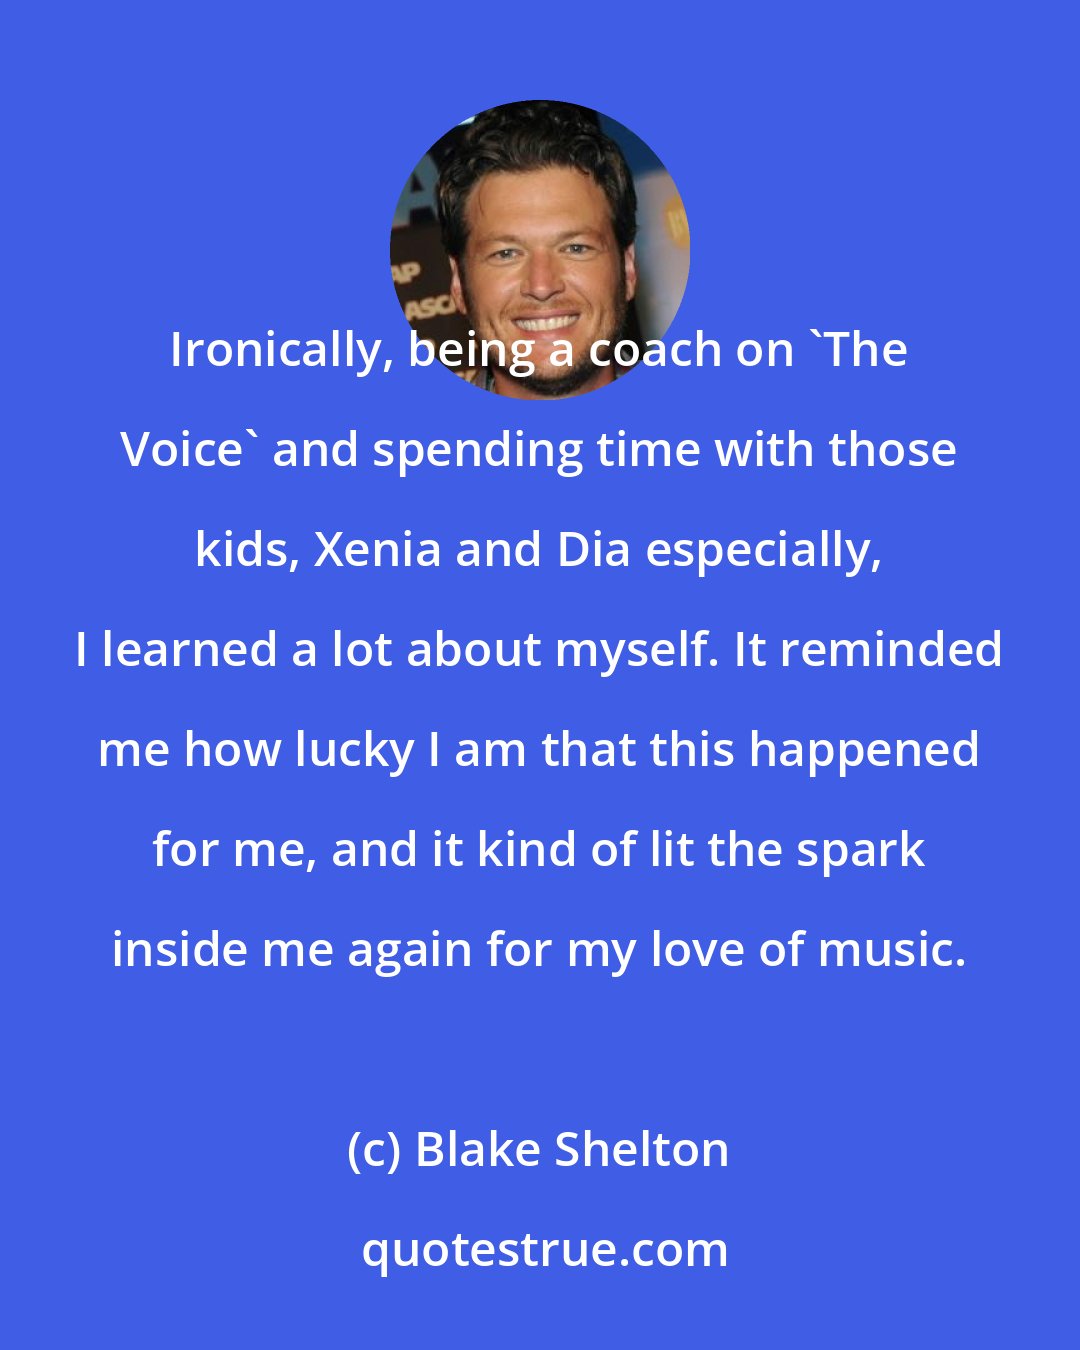 Blake Shelton: Ironically, being a coach on 'The Voice' and spending time with those kids, Xenia and Dia especially, I learned a lot about myself. It reminded me how lucky I am that this happened for me, and it kind of lit the spark inside me again for my love of music.